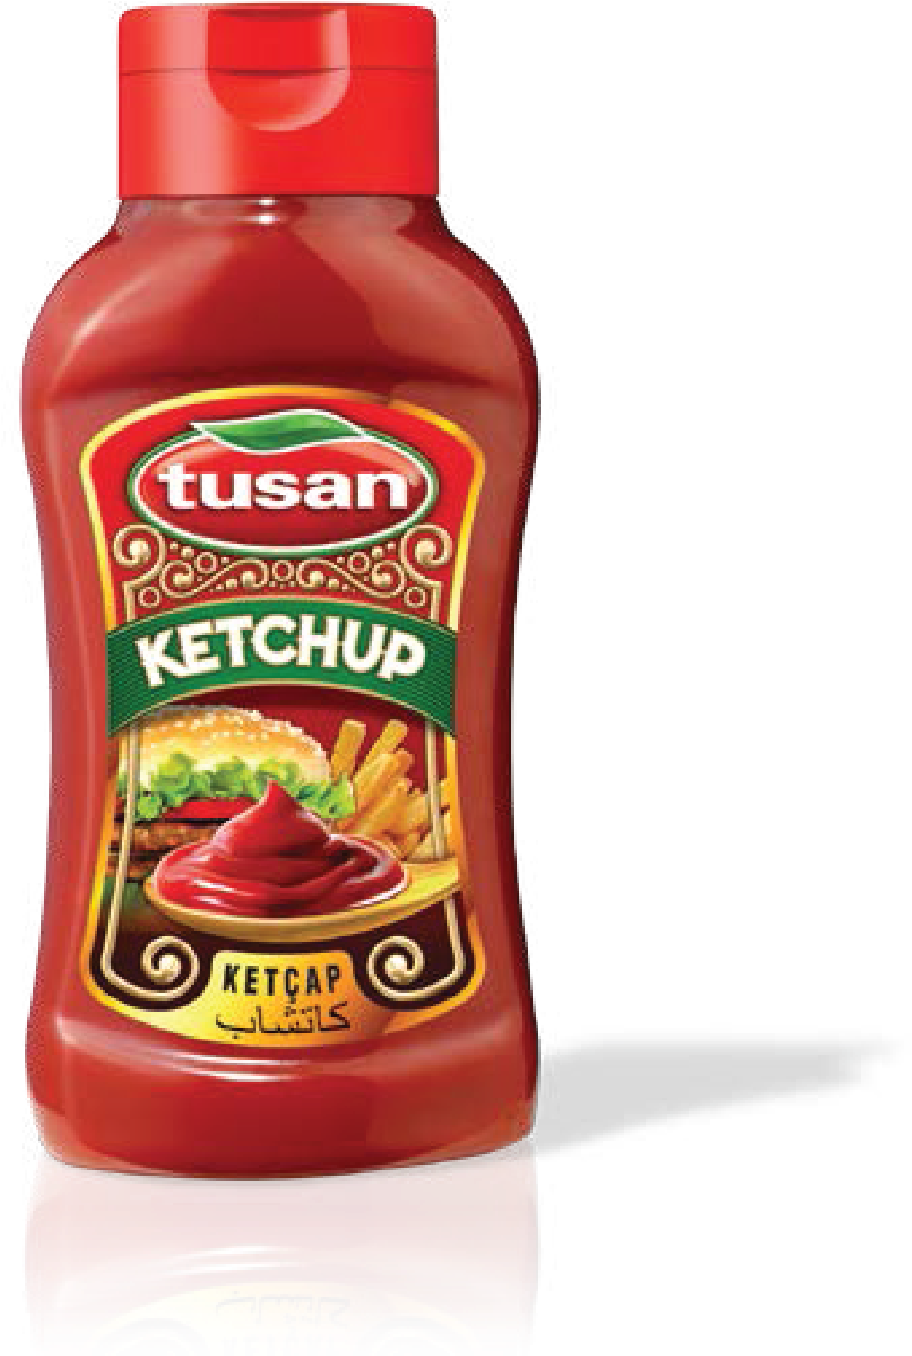 A Bottle Of Ketchup